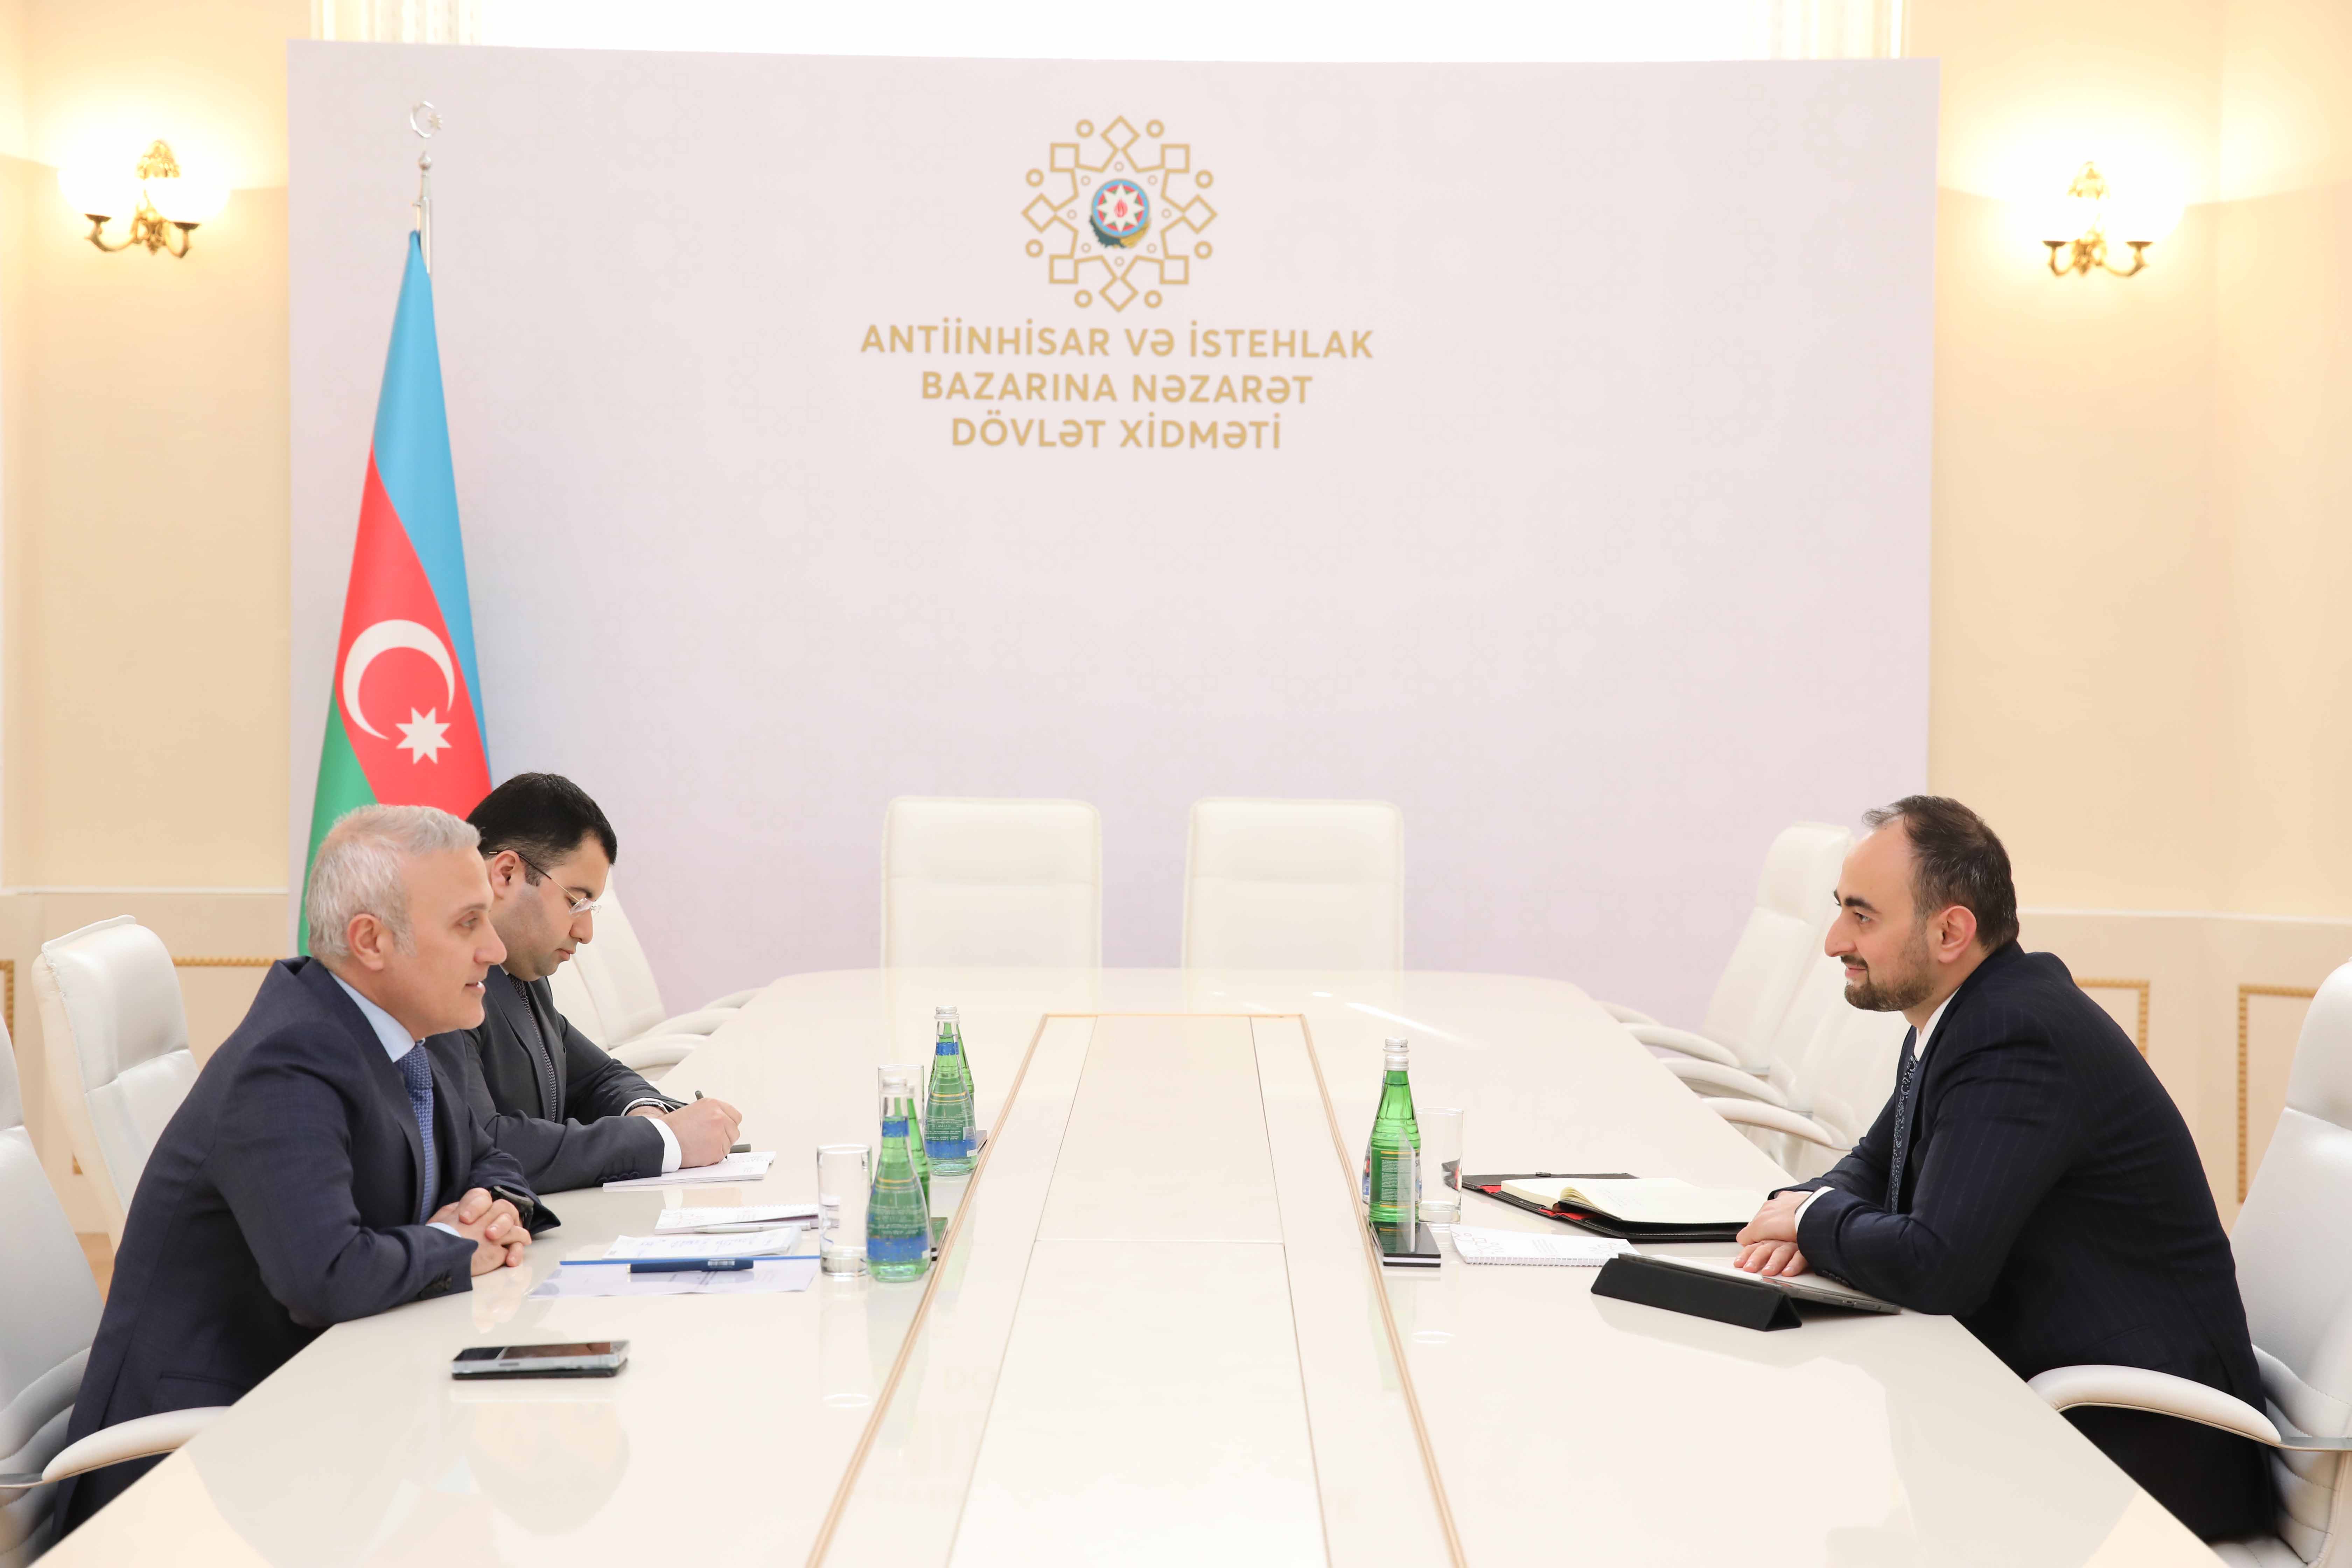 A meeting was held at the State Service with the winner of the "Yüksəliş" competition